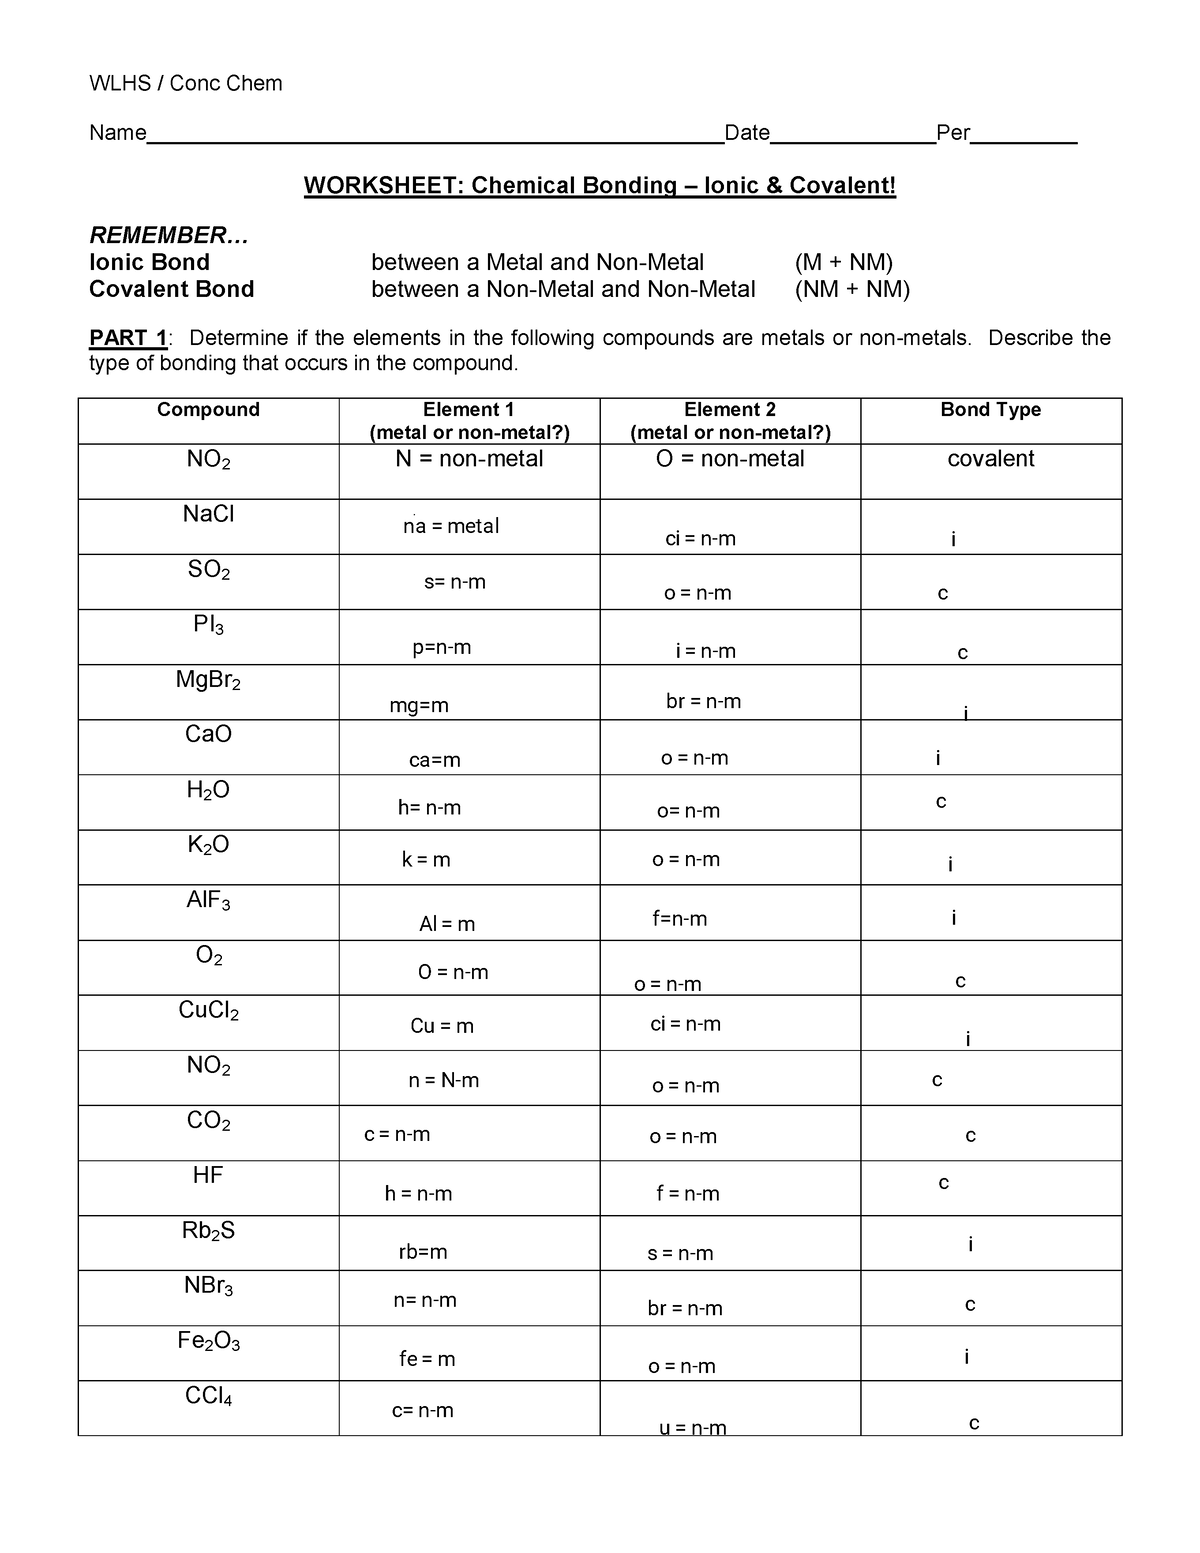 kami-export-ionic-and-covalent-bonding-practice-1-wlhs-conc-chem-name-date-per-worksheet